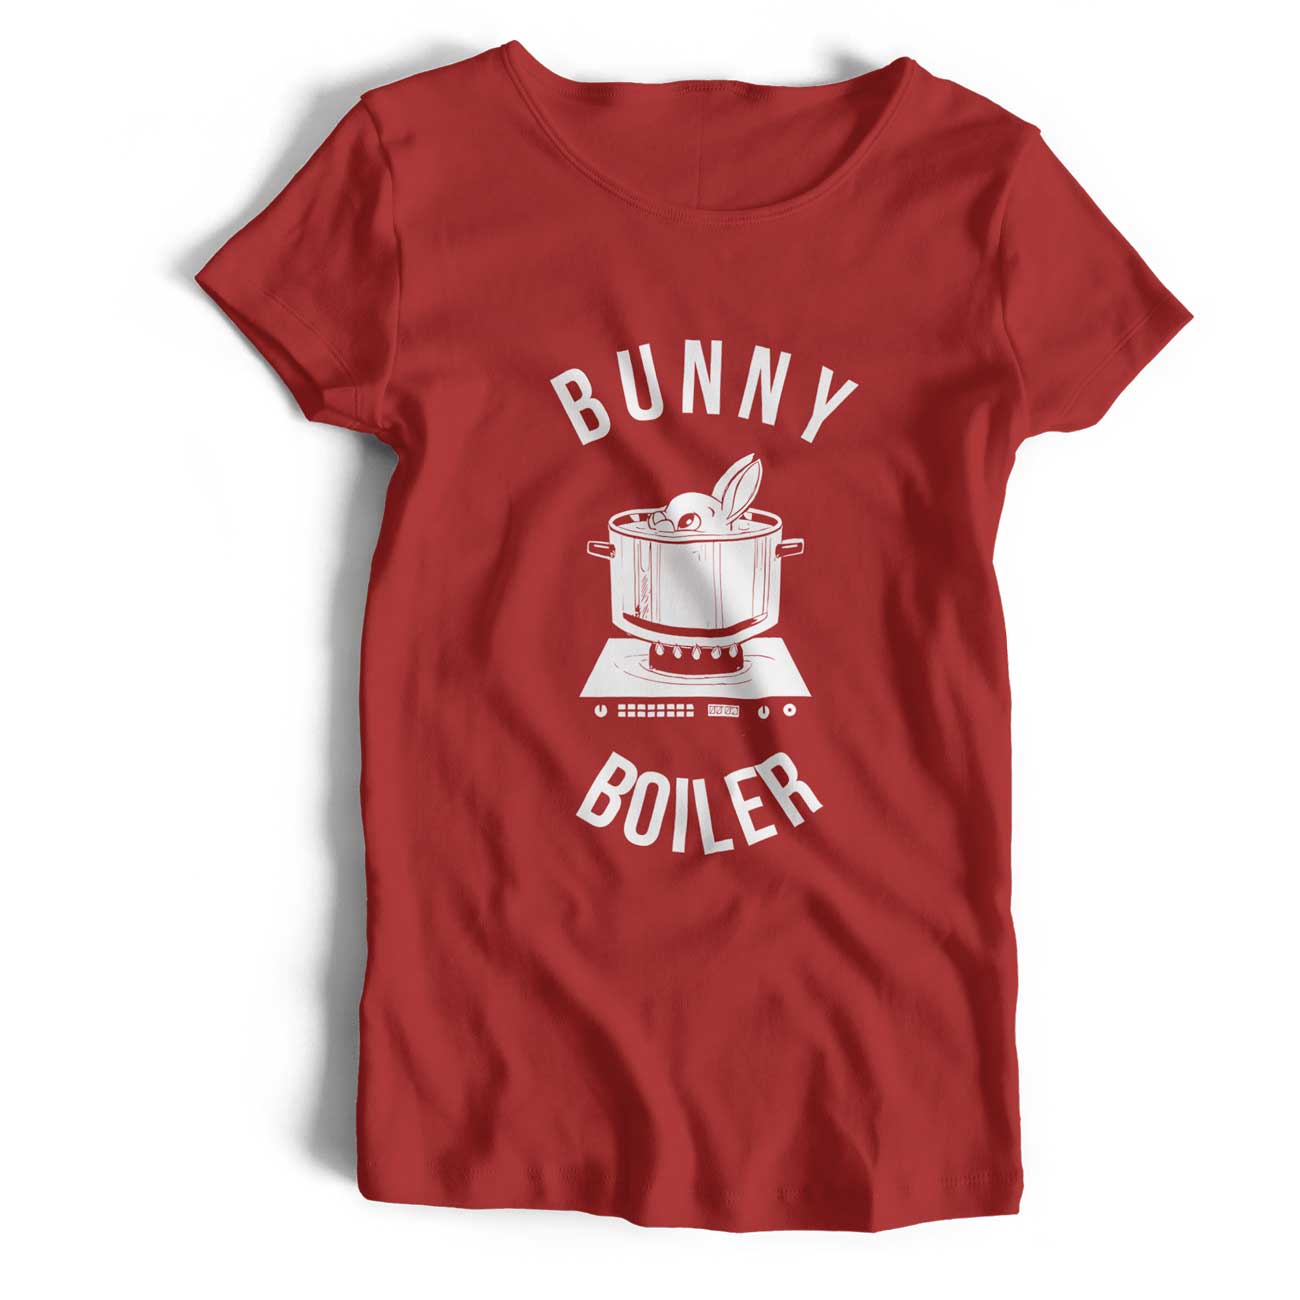 Inspired by Fatal Attraction T Shirt - Bunny Boiler! An Old Skool Hooligans Lady Fit Only Classic Movie Design